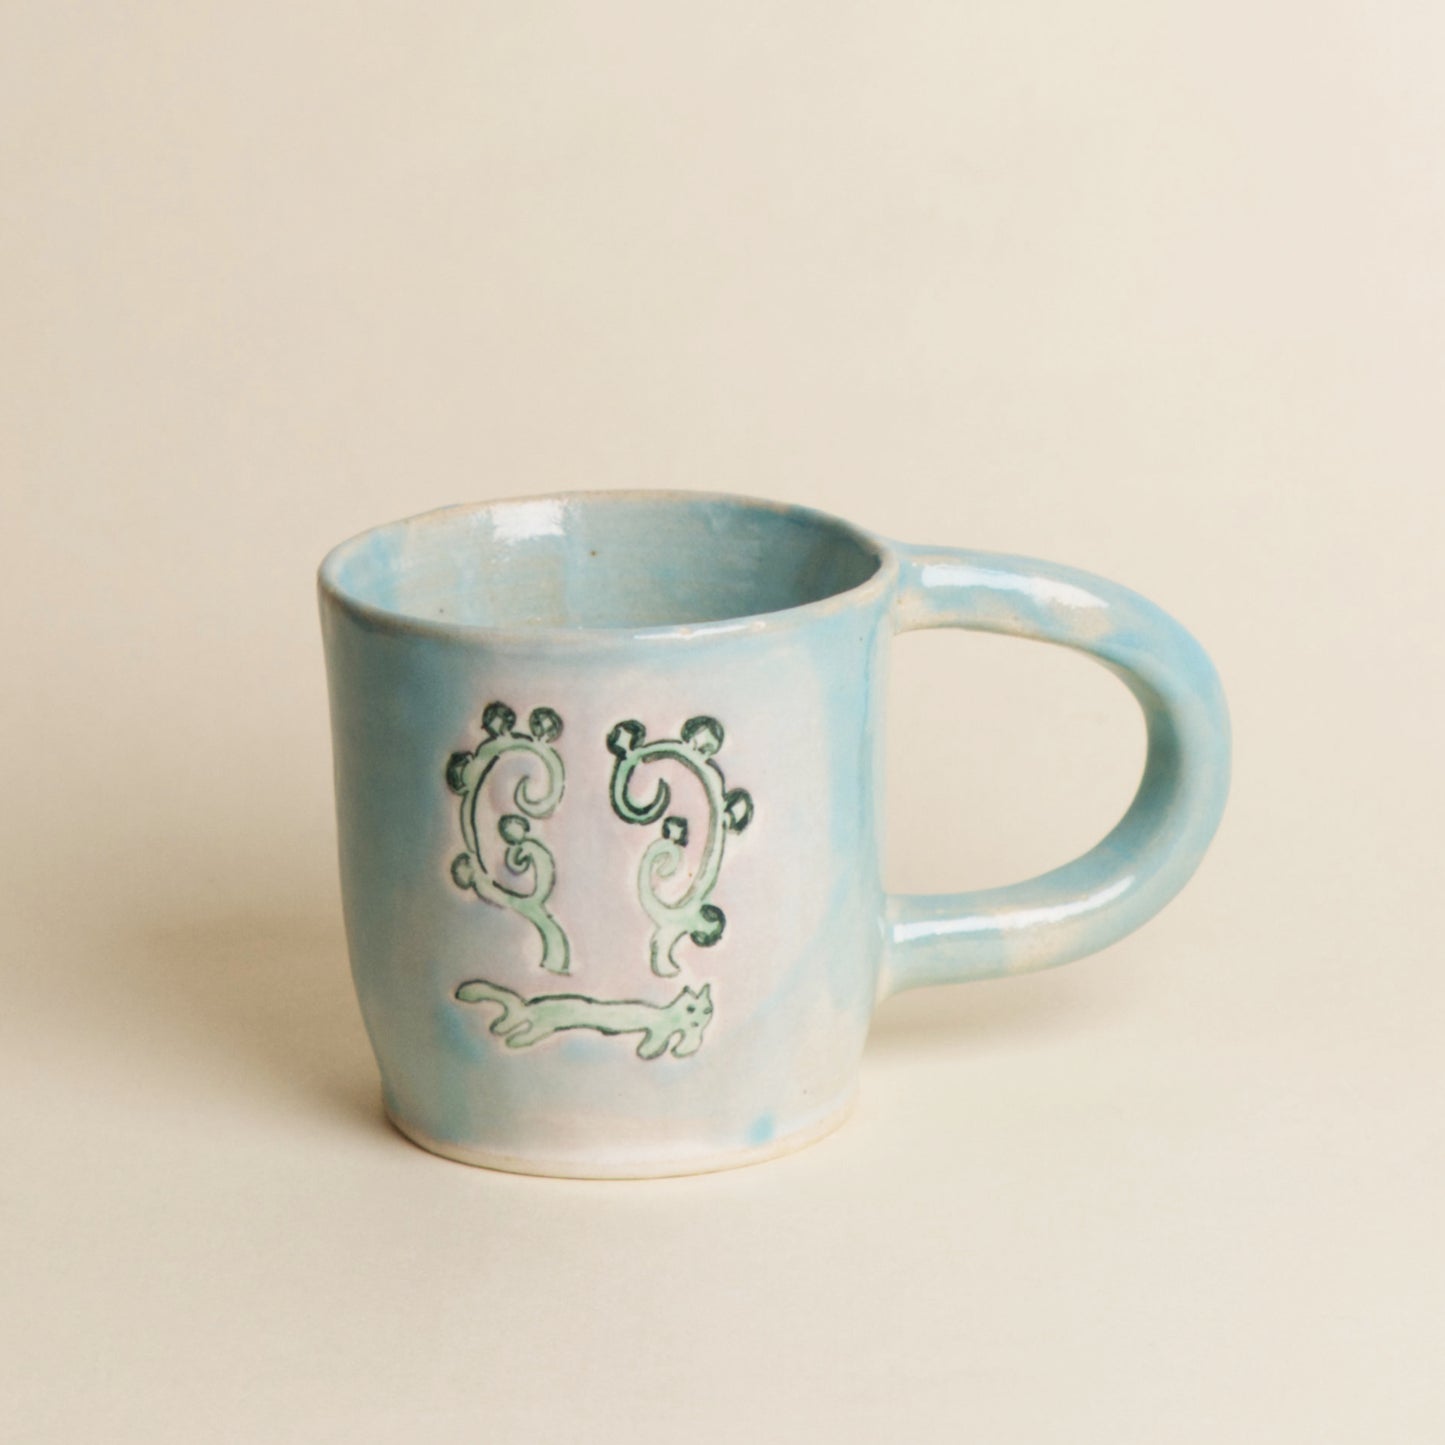 ULALA AND CAT CUP